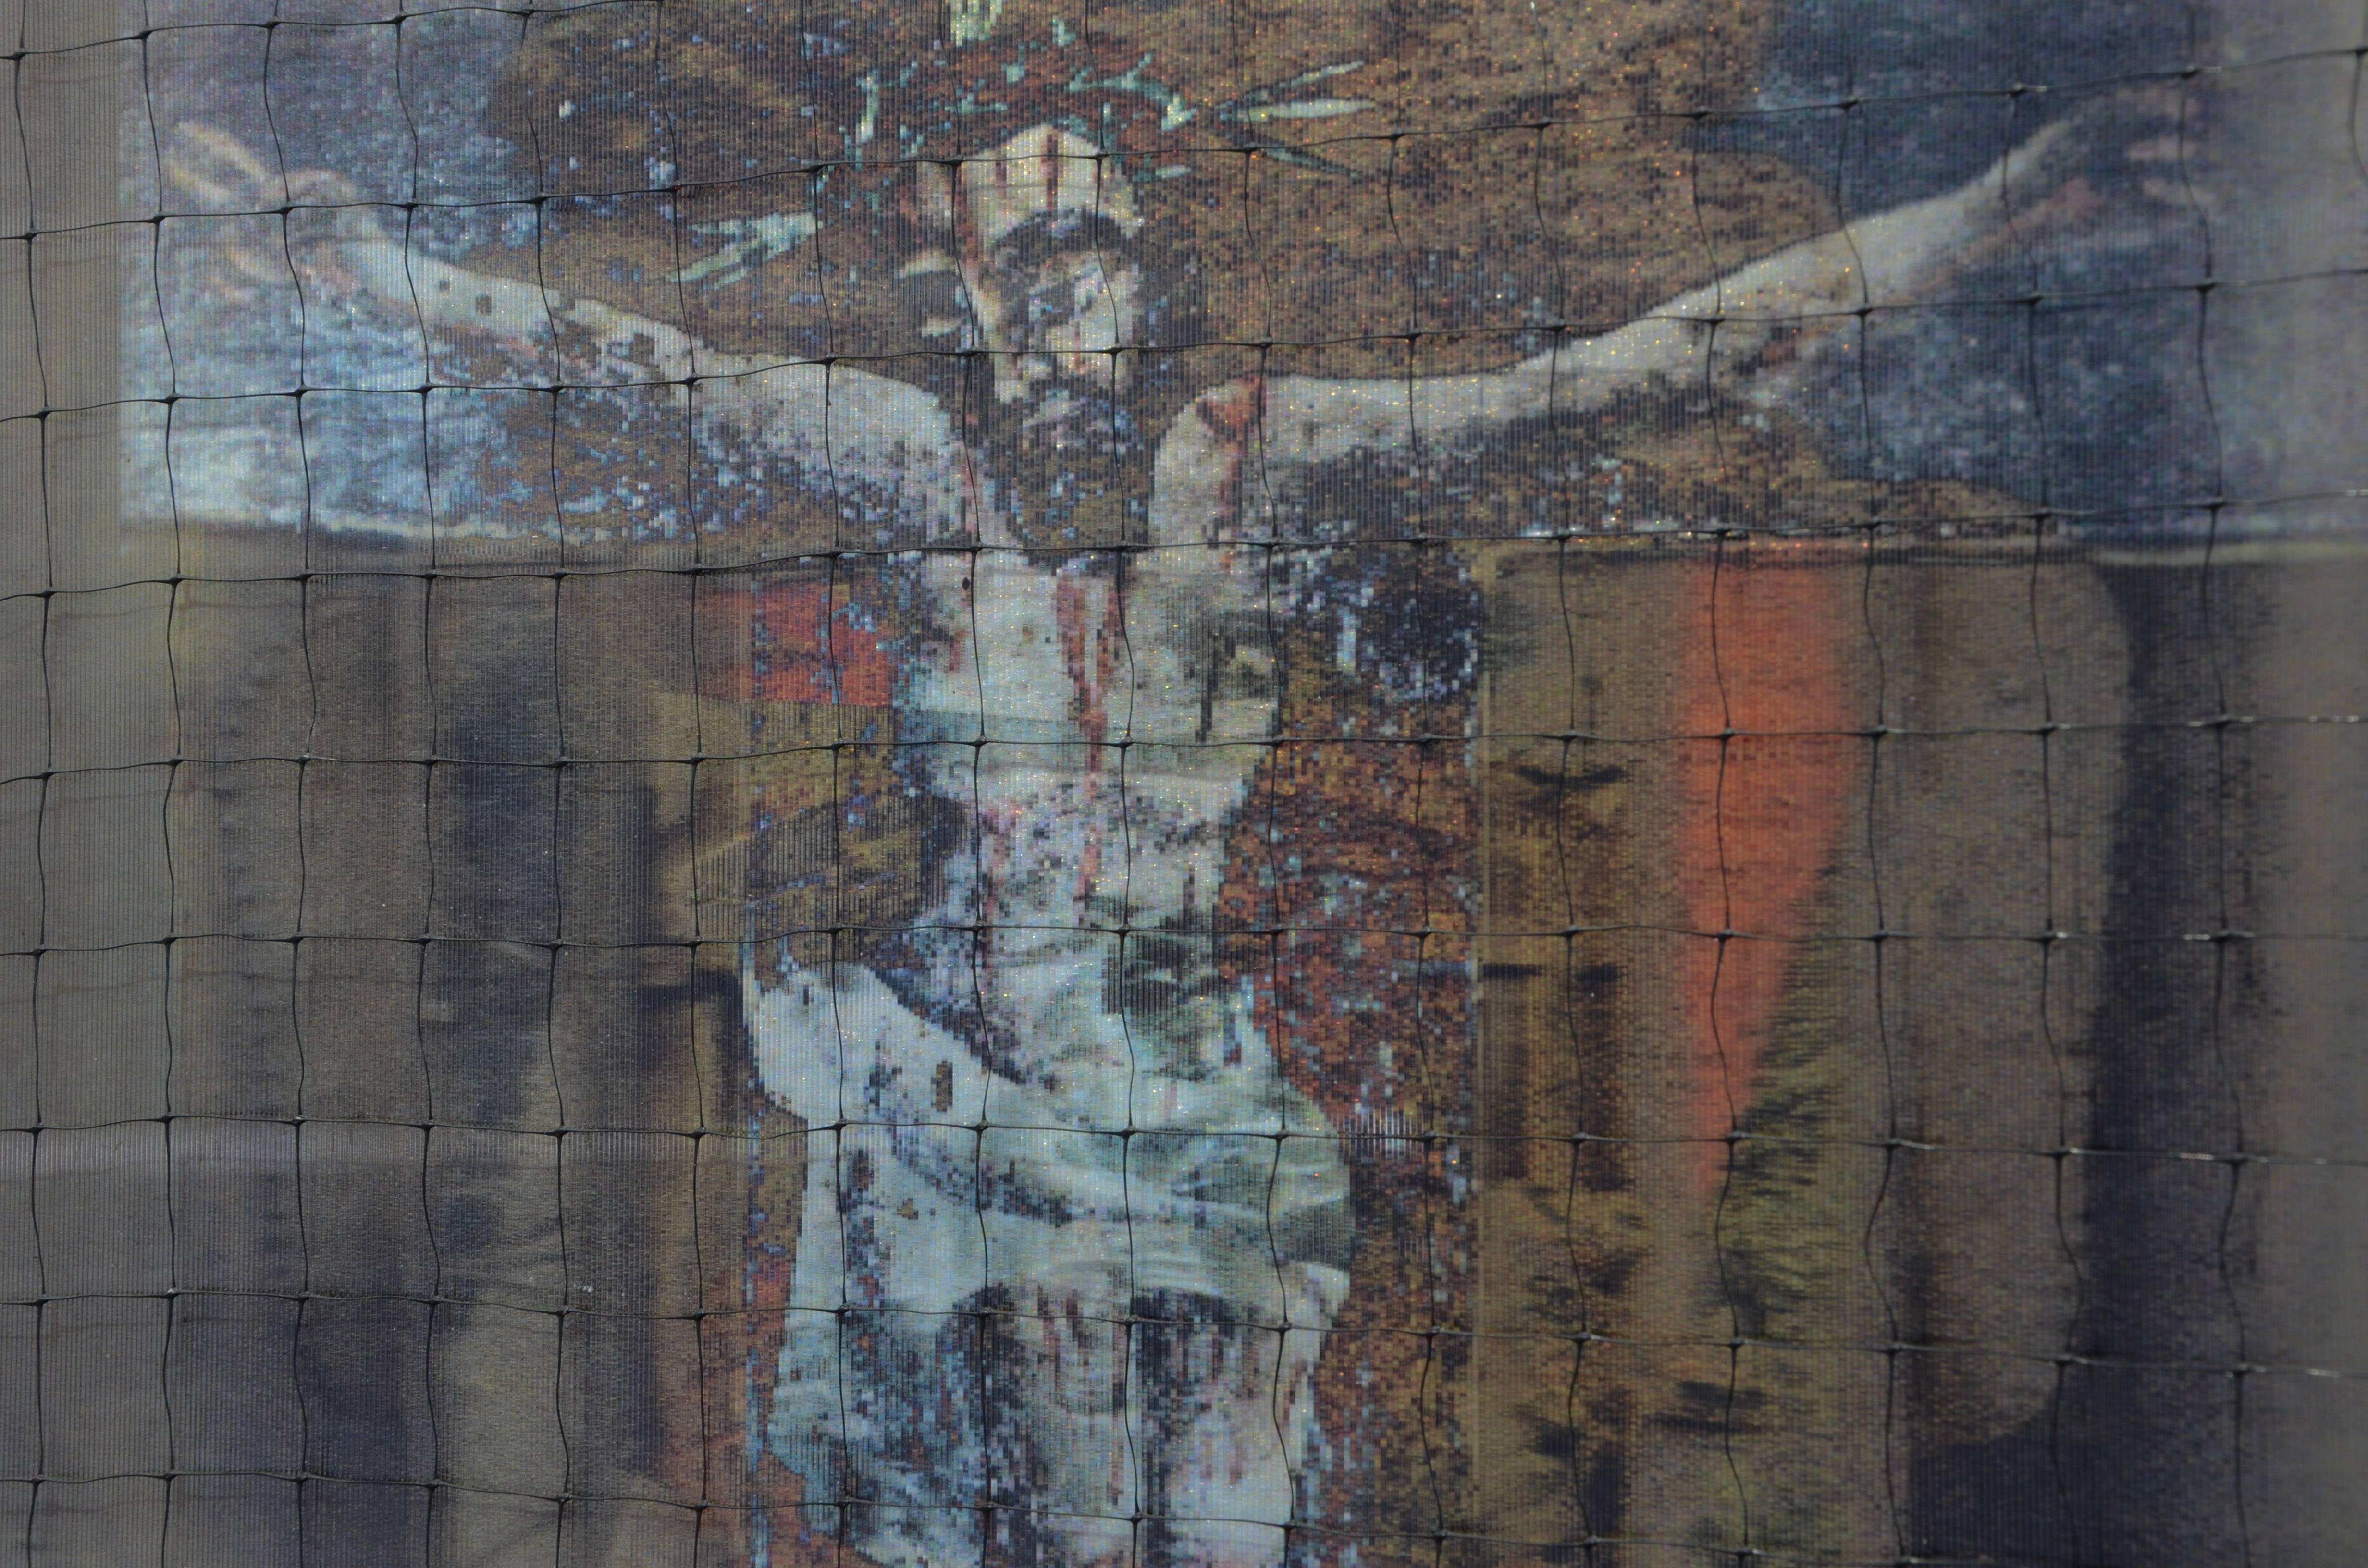 Dorothy Simpson Krause’ “Bleeding Jesus” is a 12 x 12 inch lenticular work with mixed media. The lenticular image of Jesus with the crown of thorns floats over a shimmering background, a golden halo and a silver cross.  The work has the feel of a